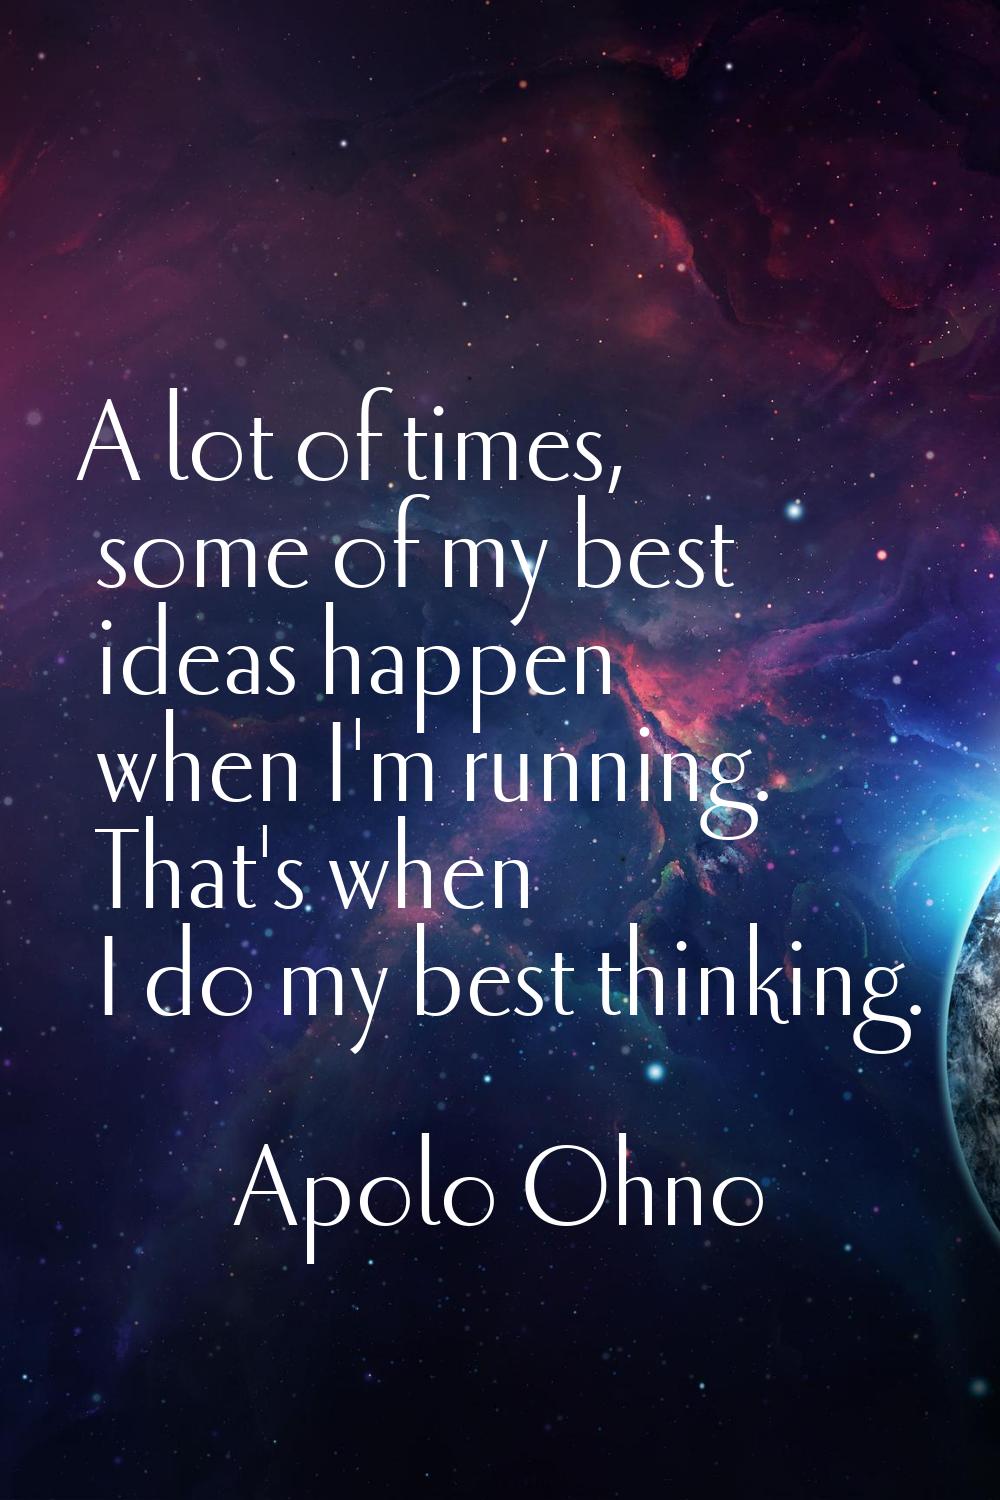 A lot of times, some of my best ideas happen when I'm running. That's when I do my best thinking.